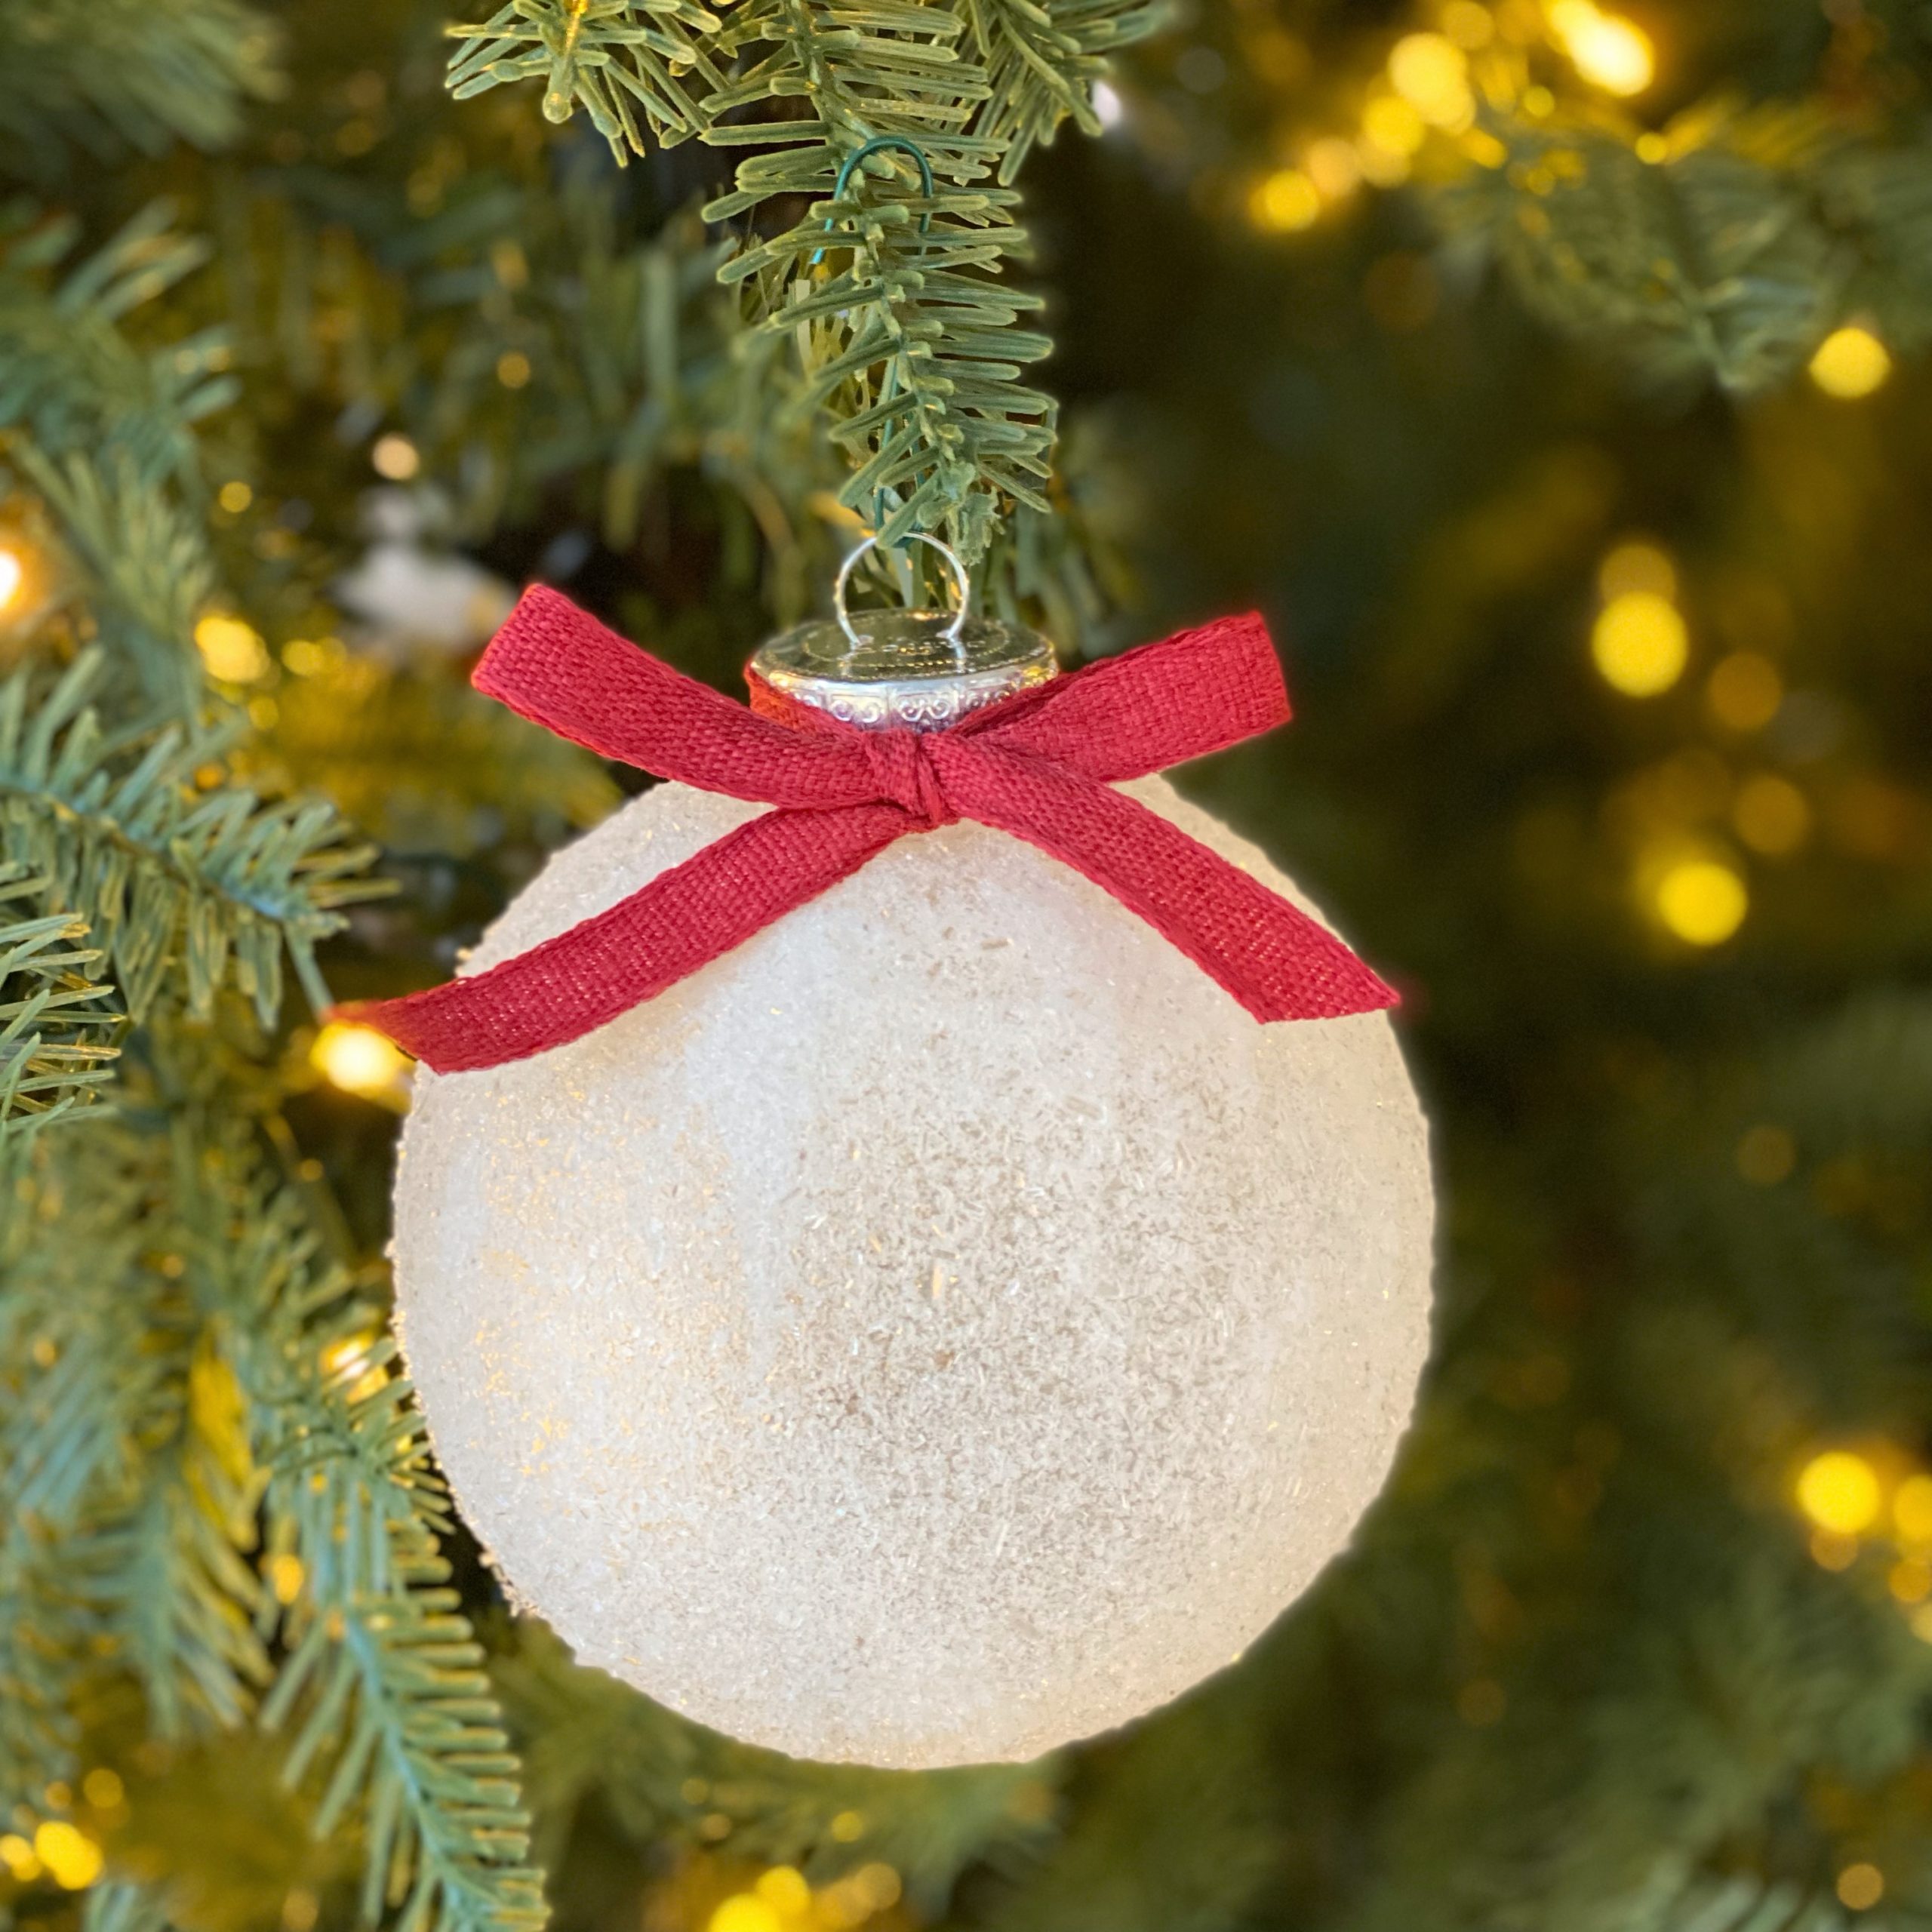 Snowy Christmas tree ball ornament with a red bow on it on the tree.